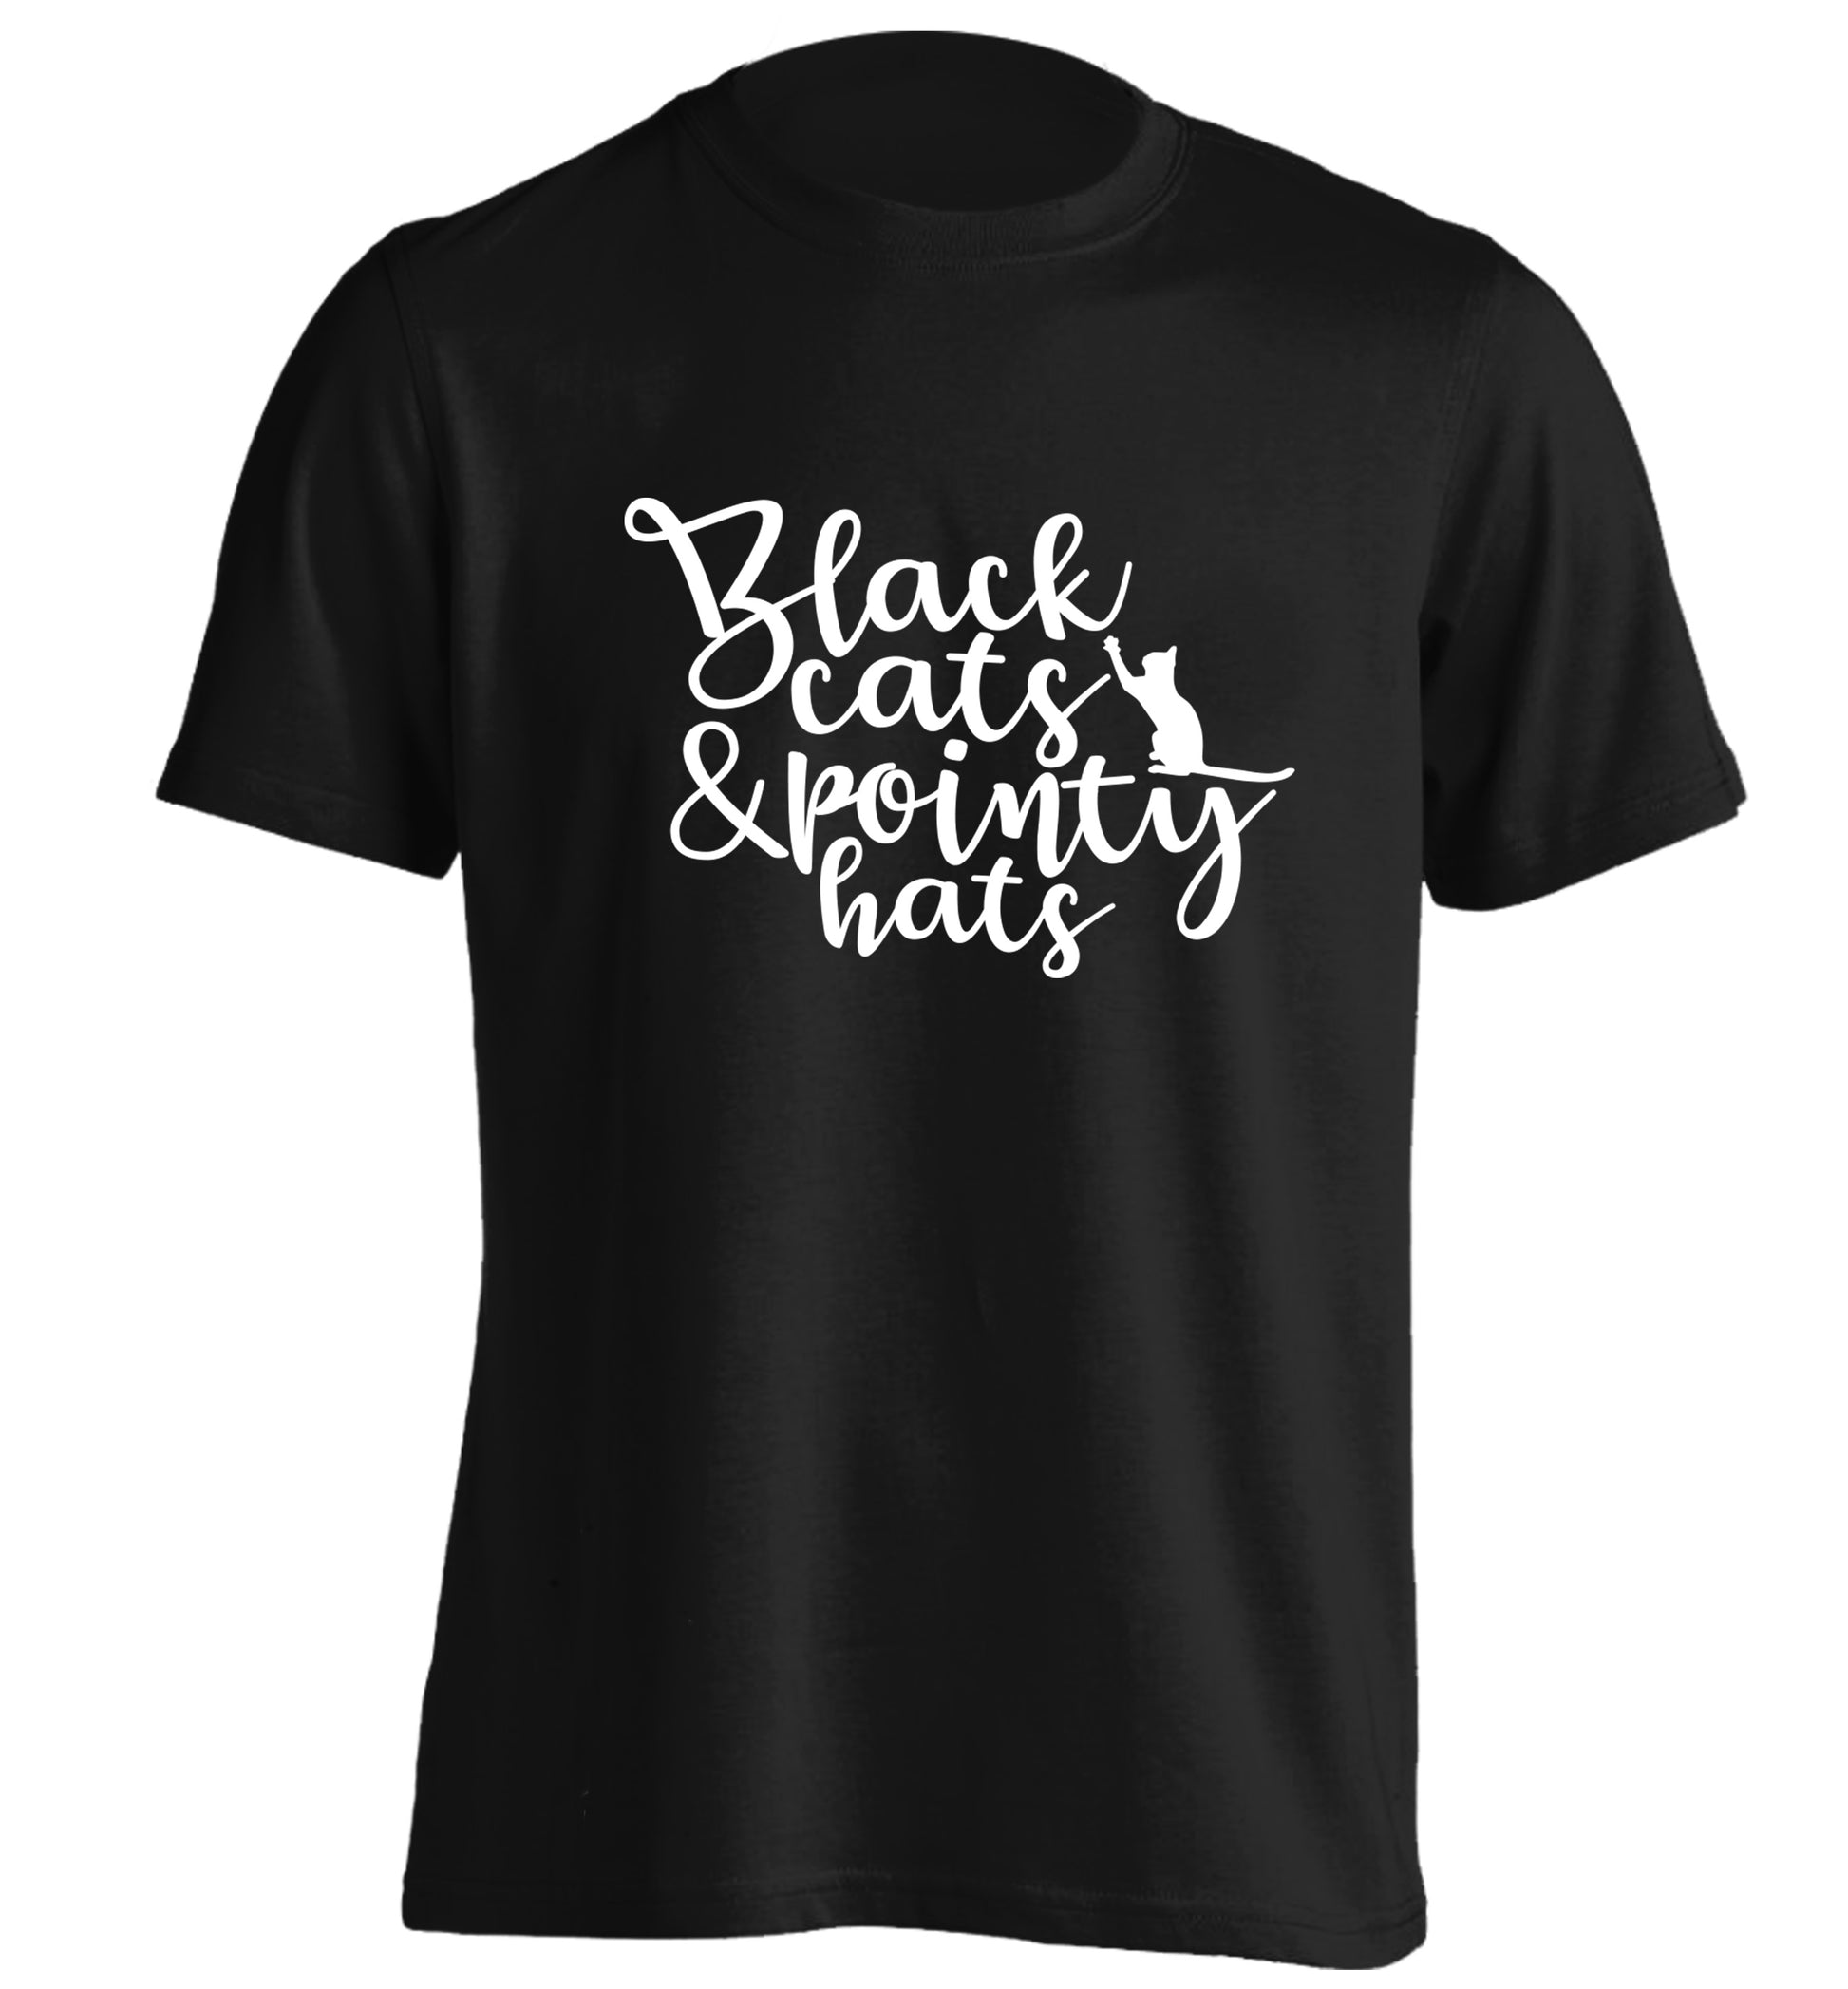 Black cats and pointy hats adults unisex black Tshirt 2XL